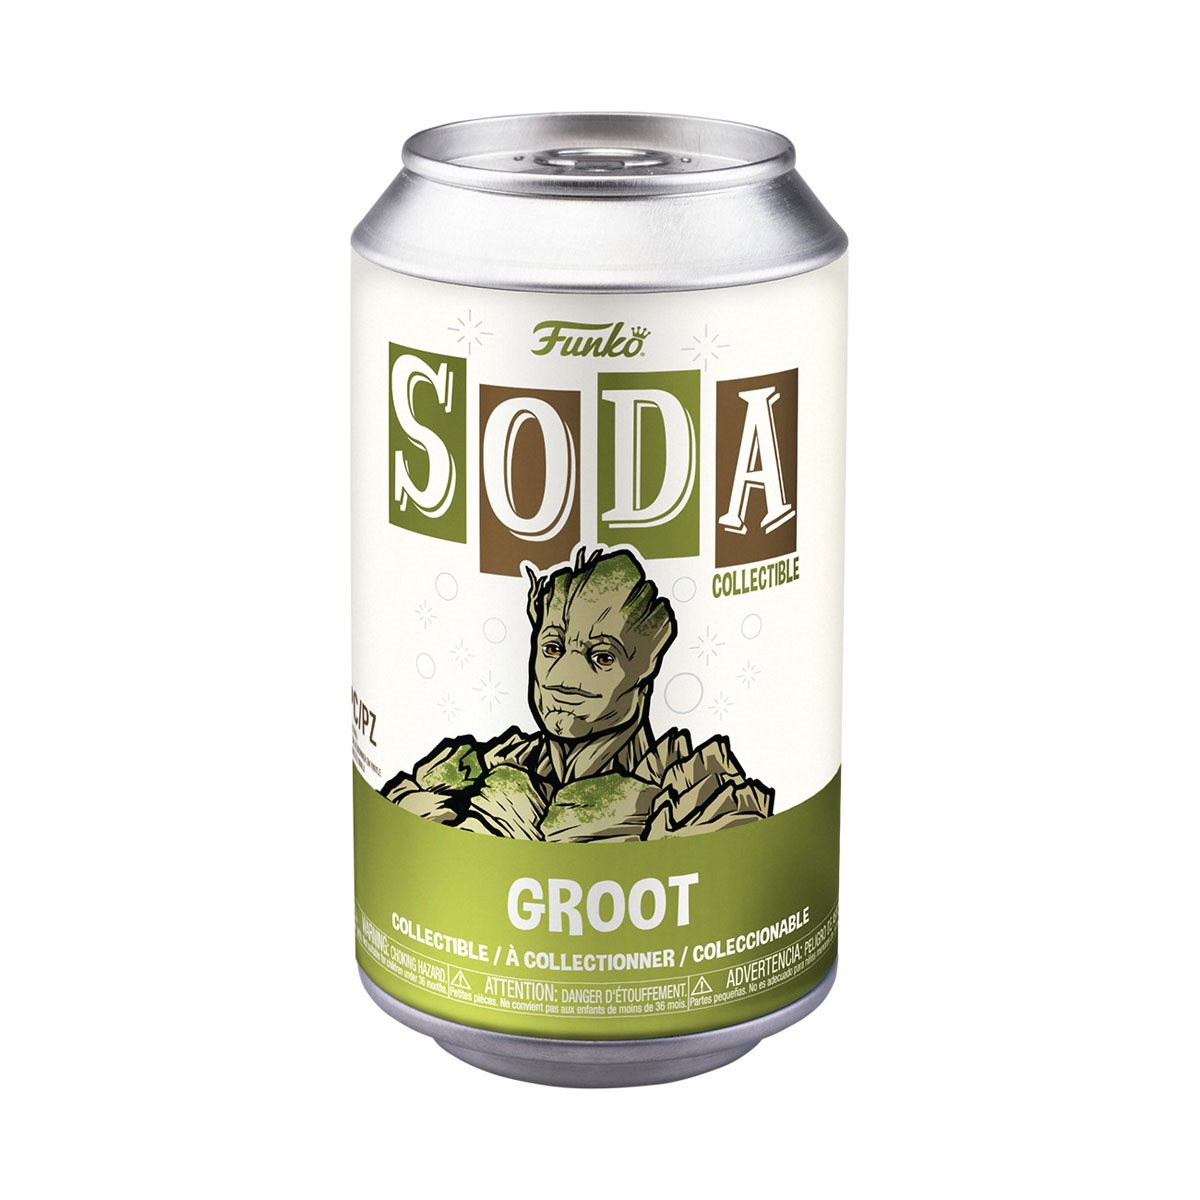 Marvel Guardians of the Galaxy Holiday Groot Funko Soda Figure